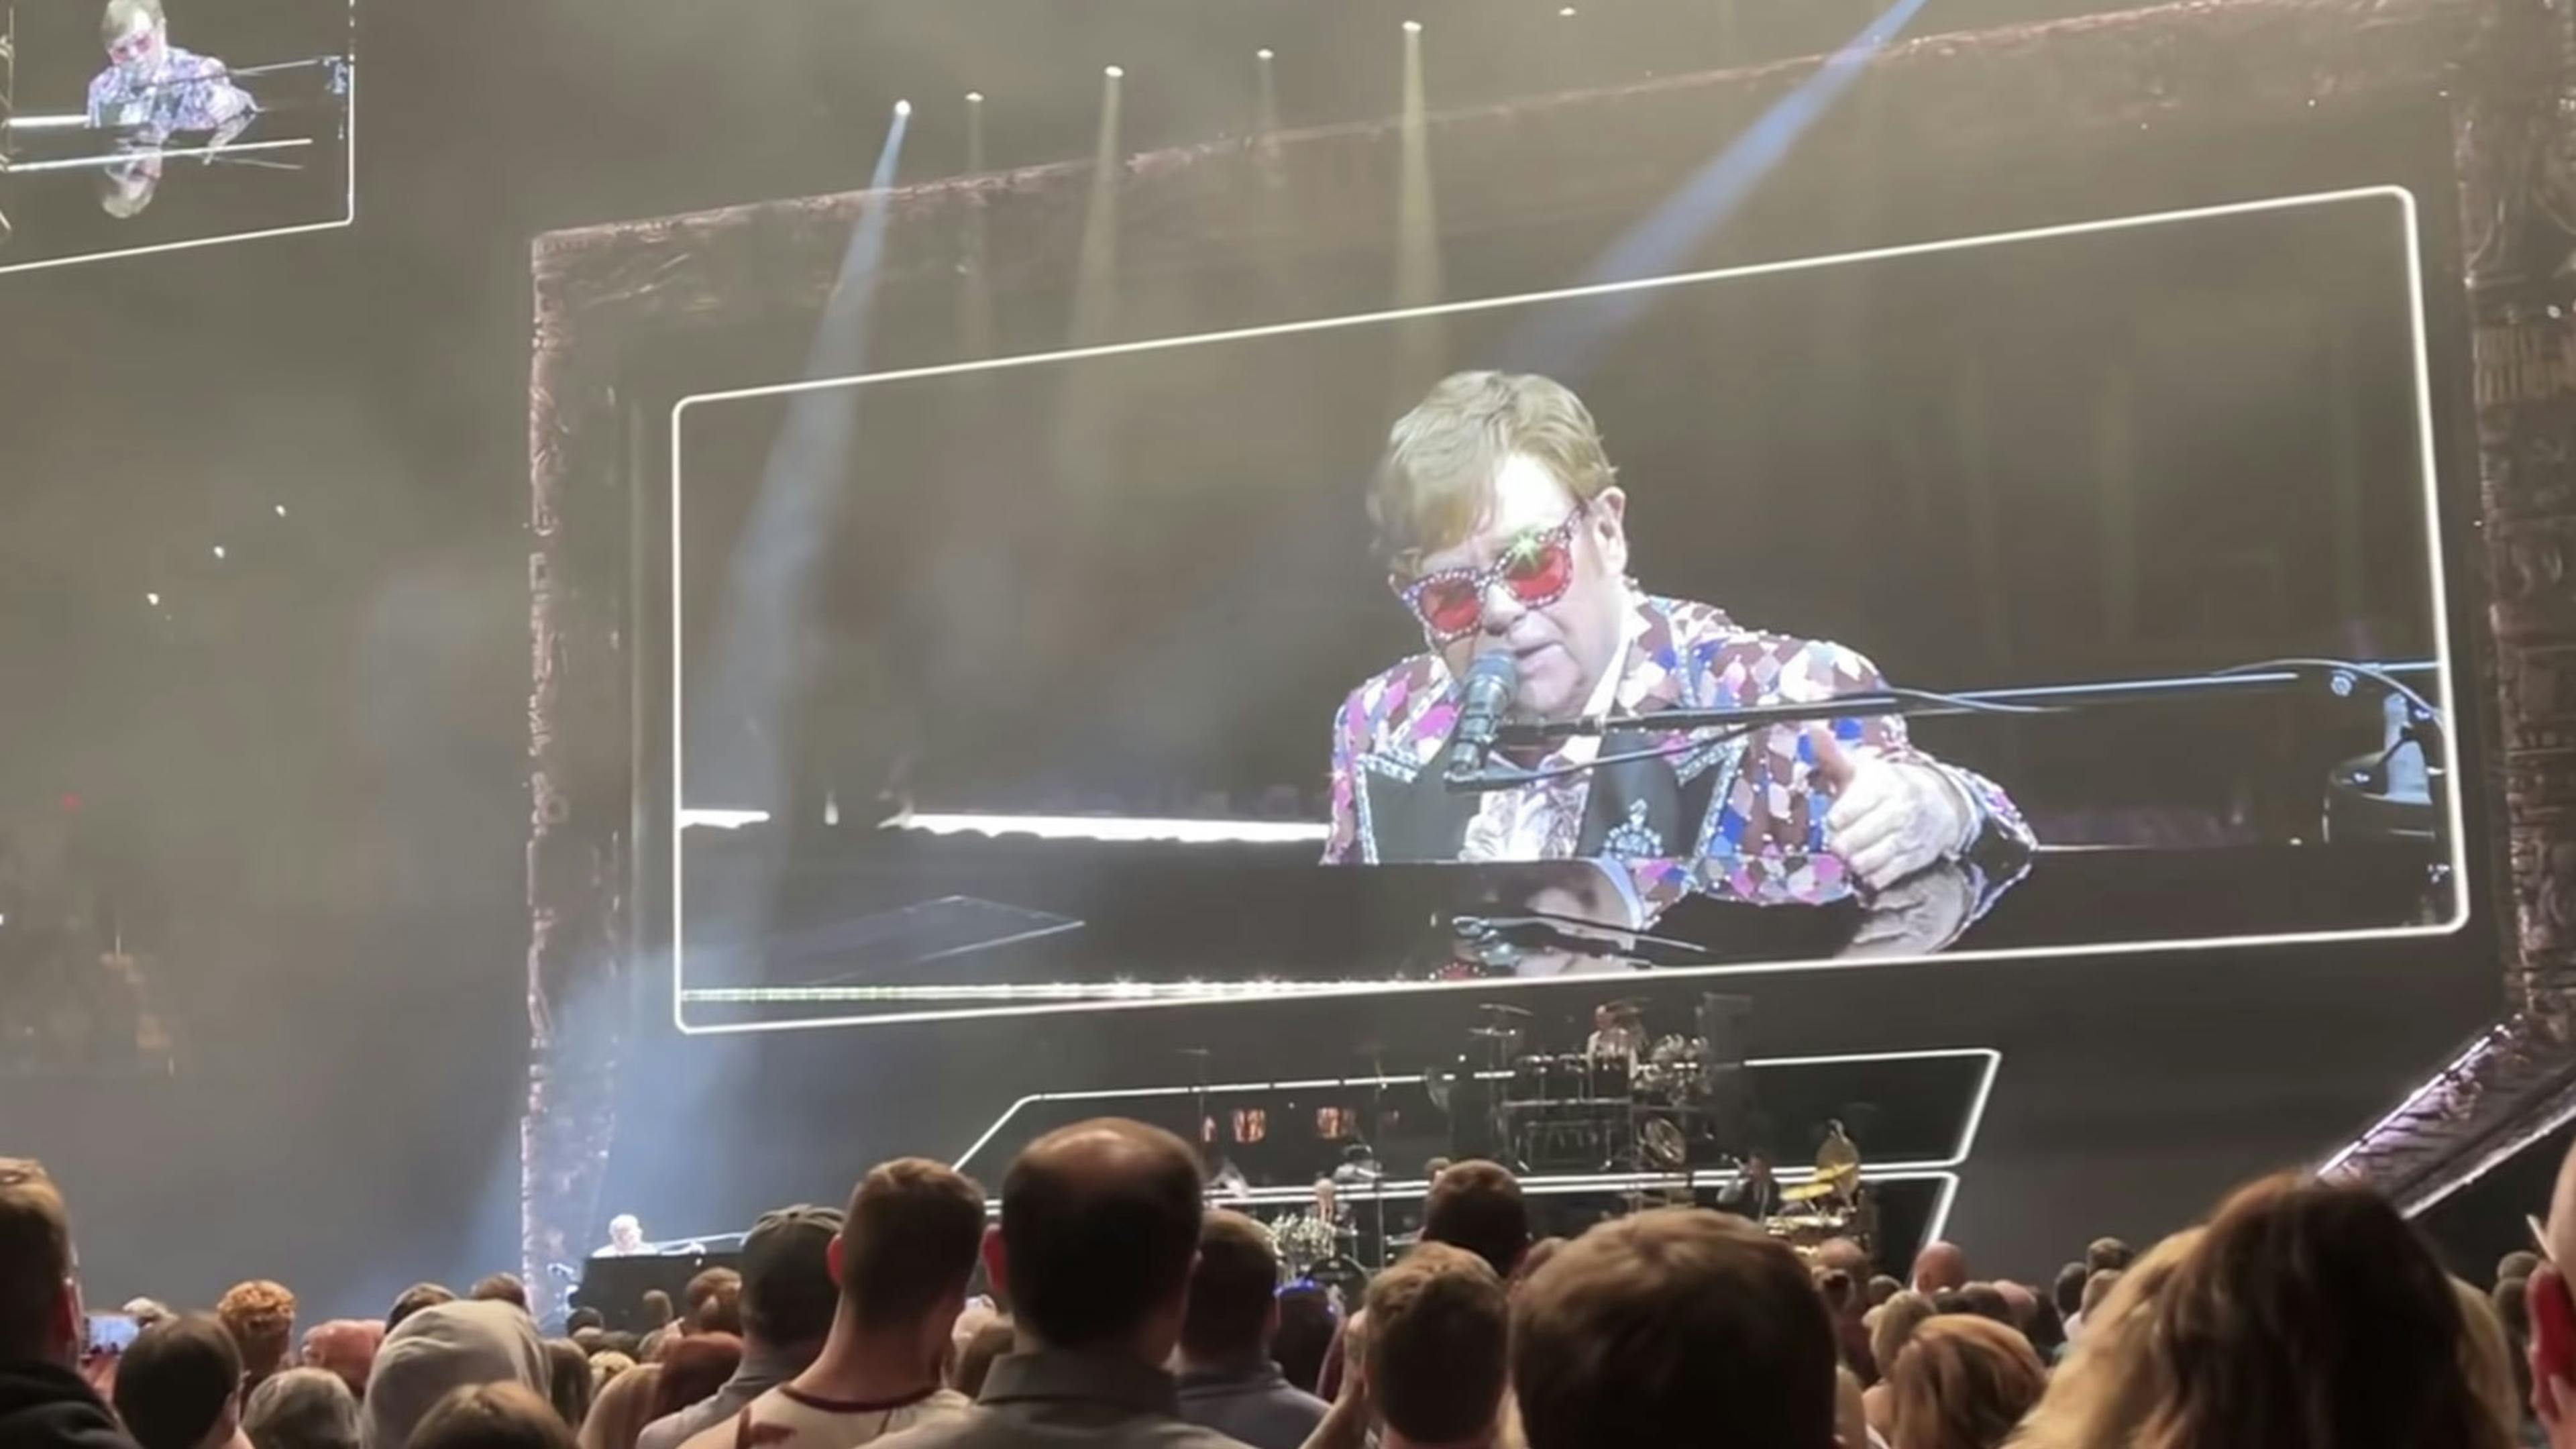 “He was one of the nicest people you could have ever met”: Elton John dedicates Don’t Let The Sun Go Down On Me to Taylor Hawkins